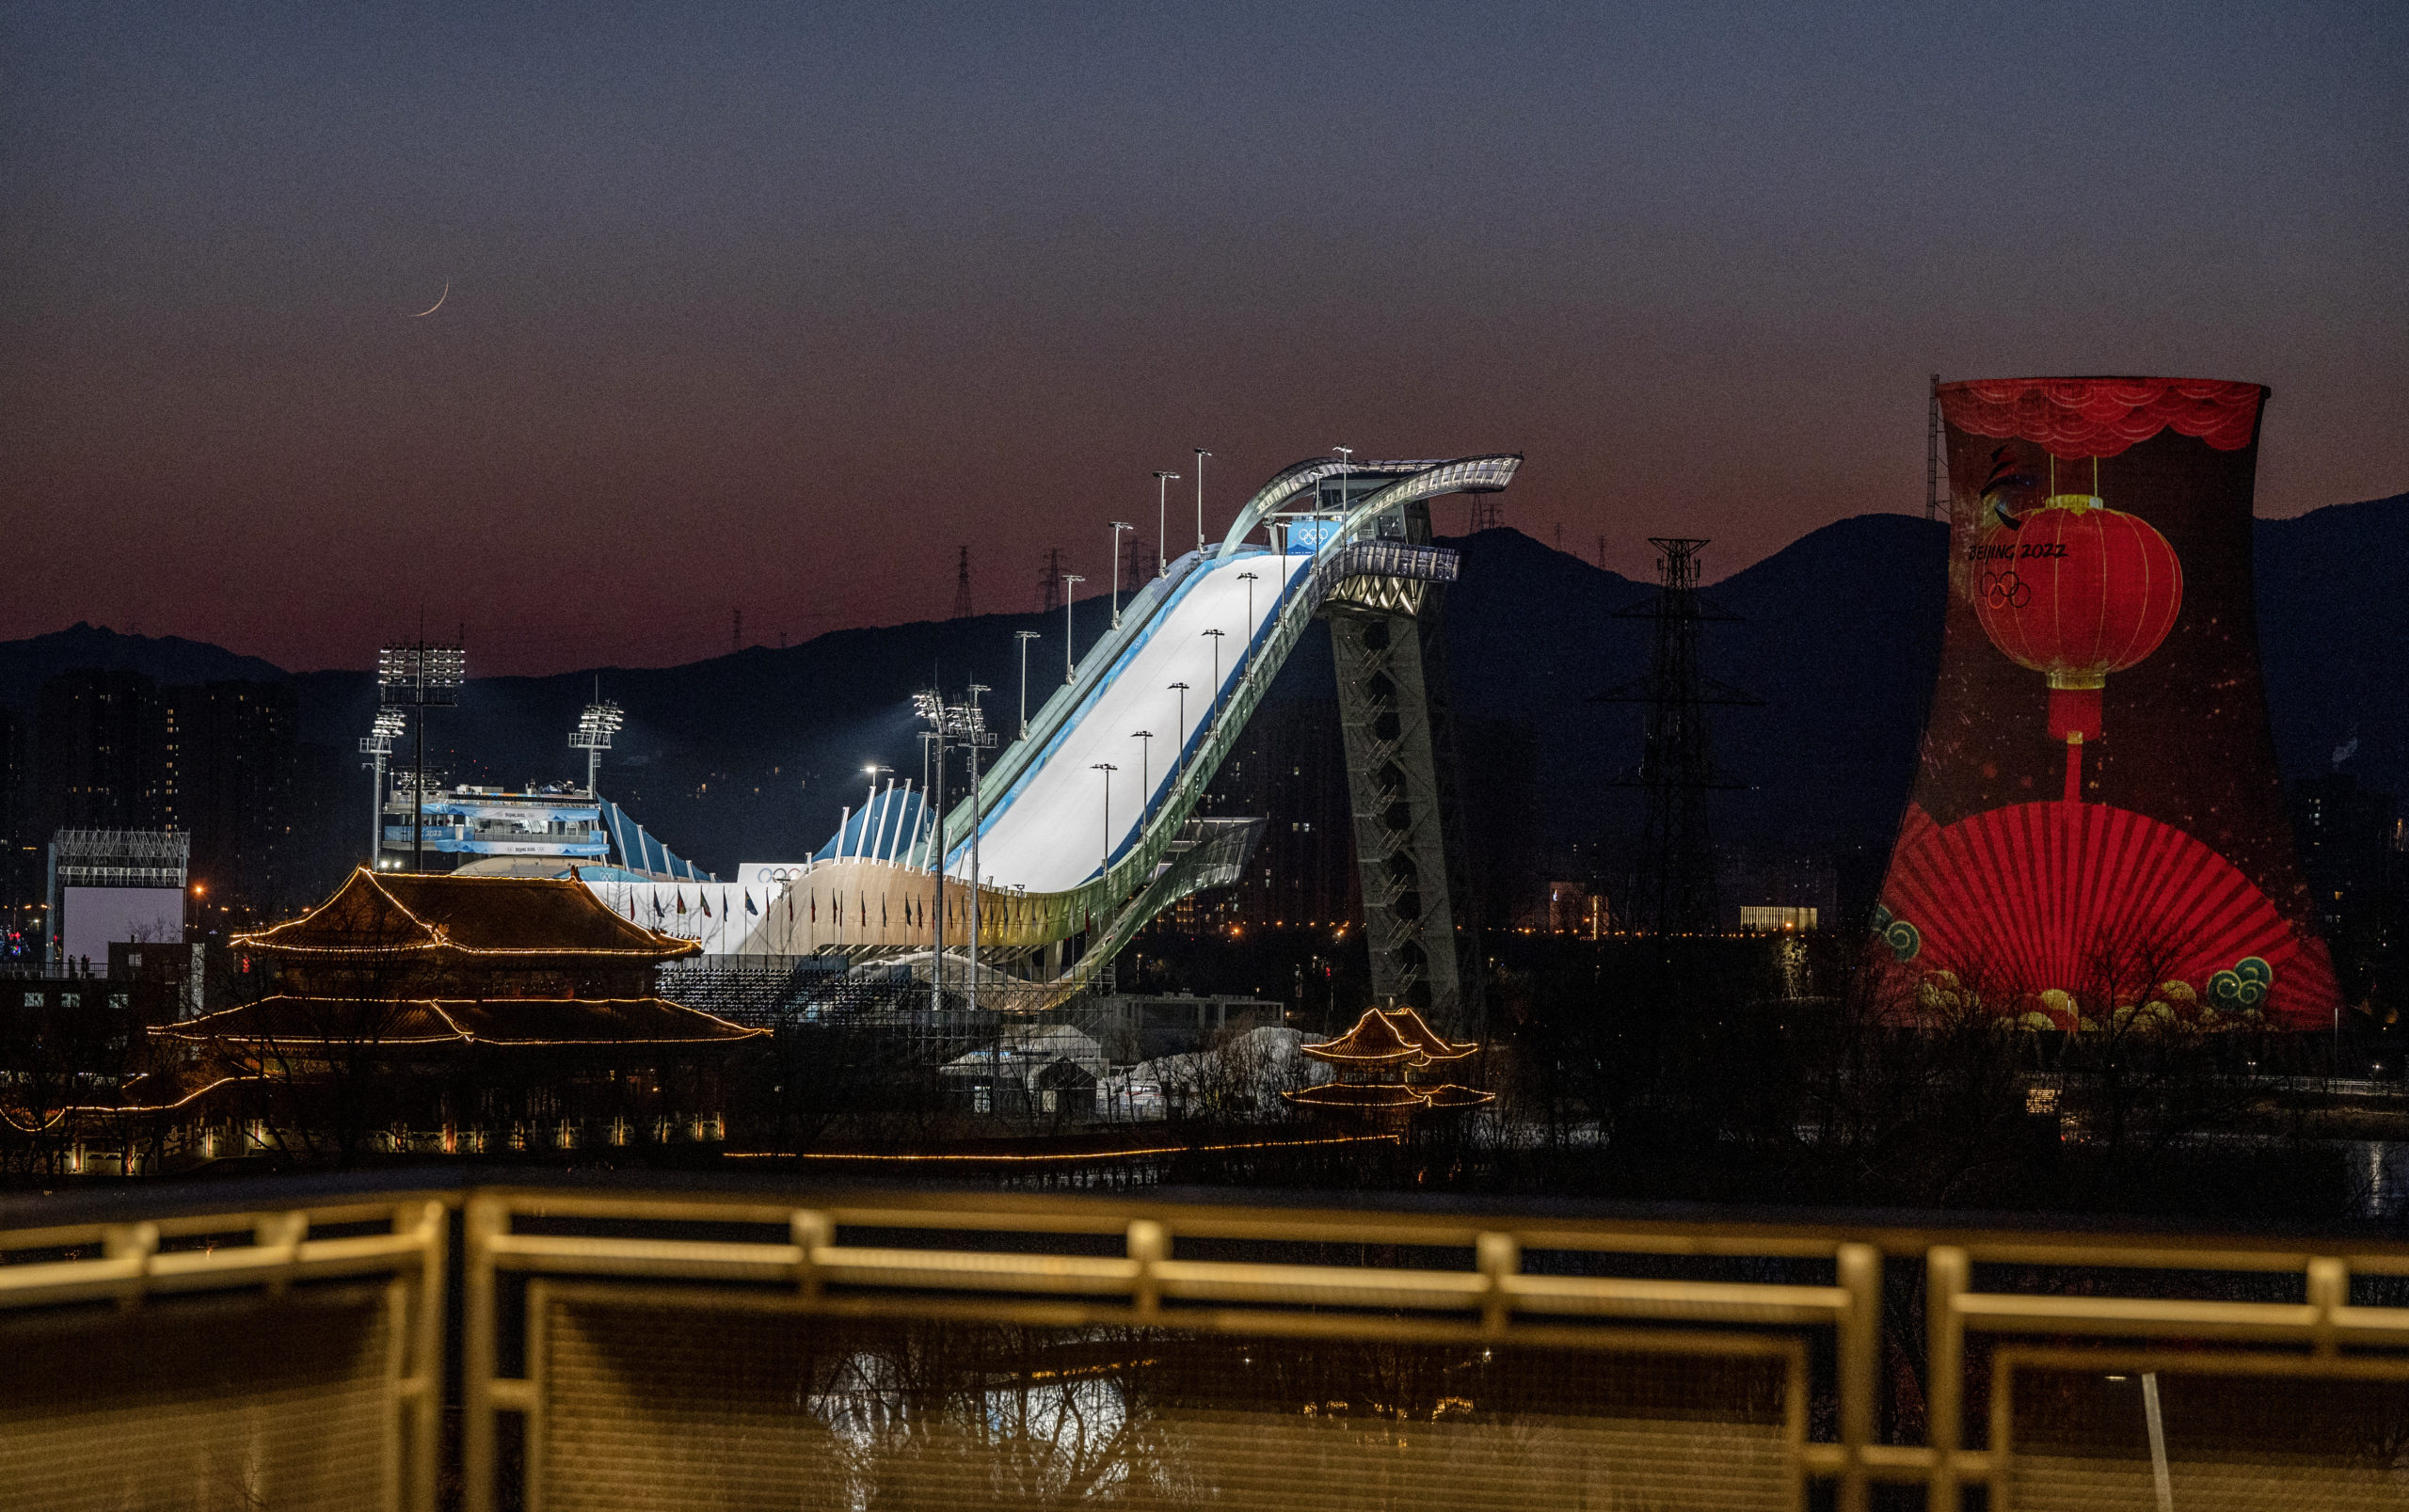 BEIJING, CHINA – FEBRUARY 2: The Big Air freestyle venue is seen at dusk at the Beijing 2022 Winter Olympics Torch Relay at Shougang Park, which will host freestyle skiing, on February 2, 2022 in Beijing, China. The games are set to open on February 4th. (Photo by Kevin Frayer/Getty Images) 